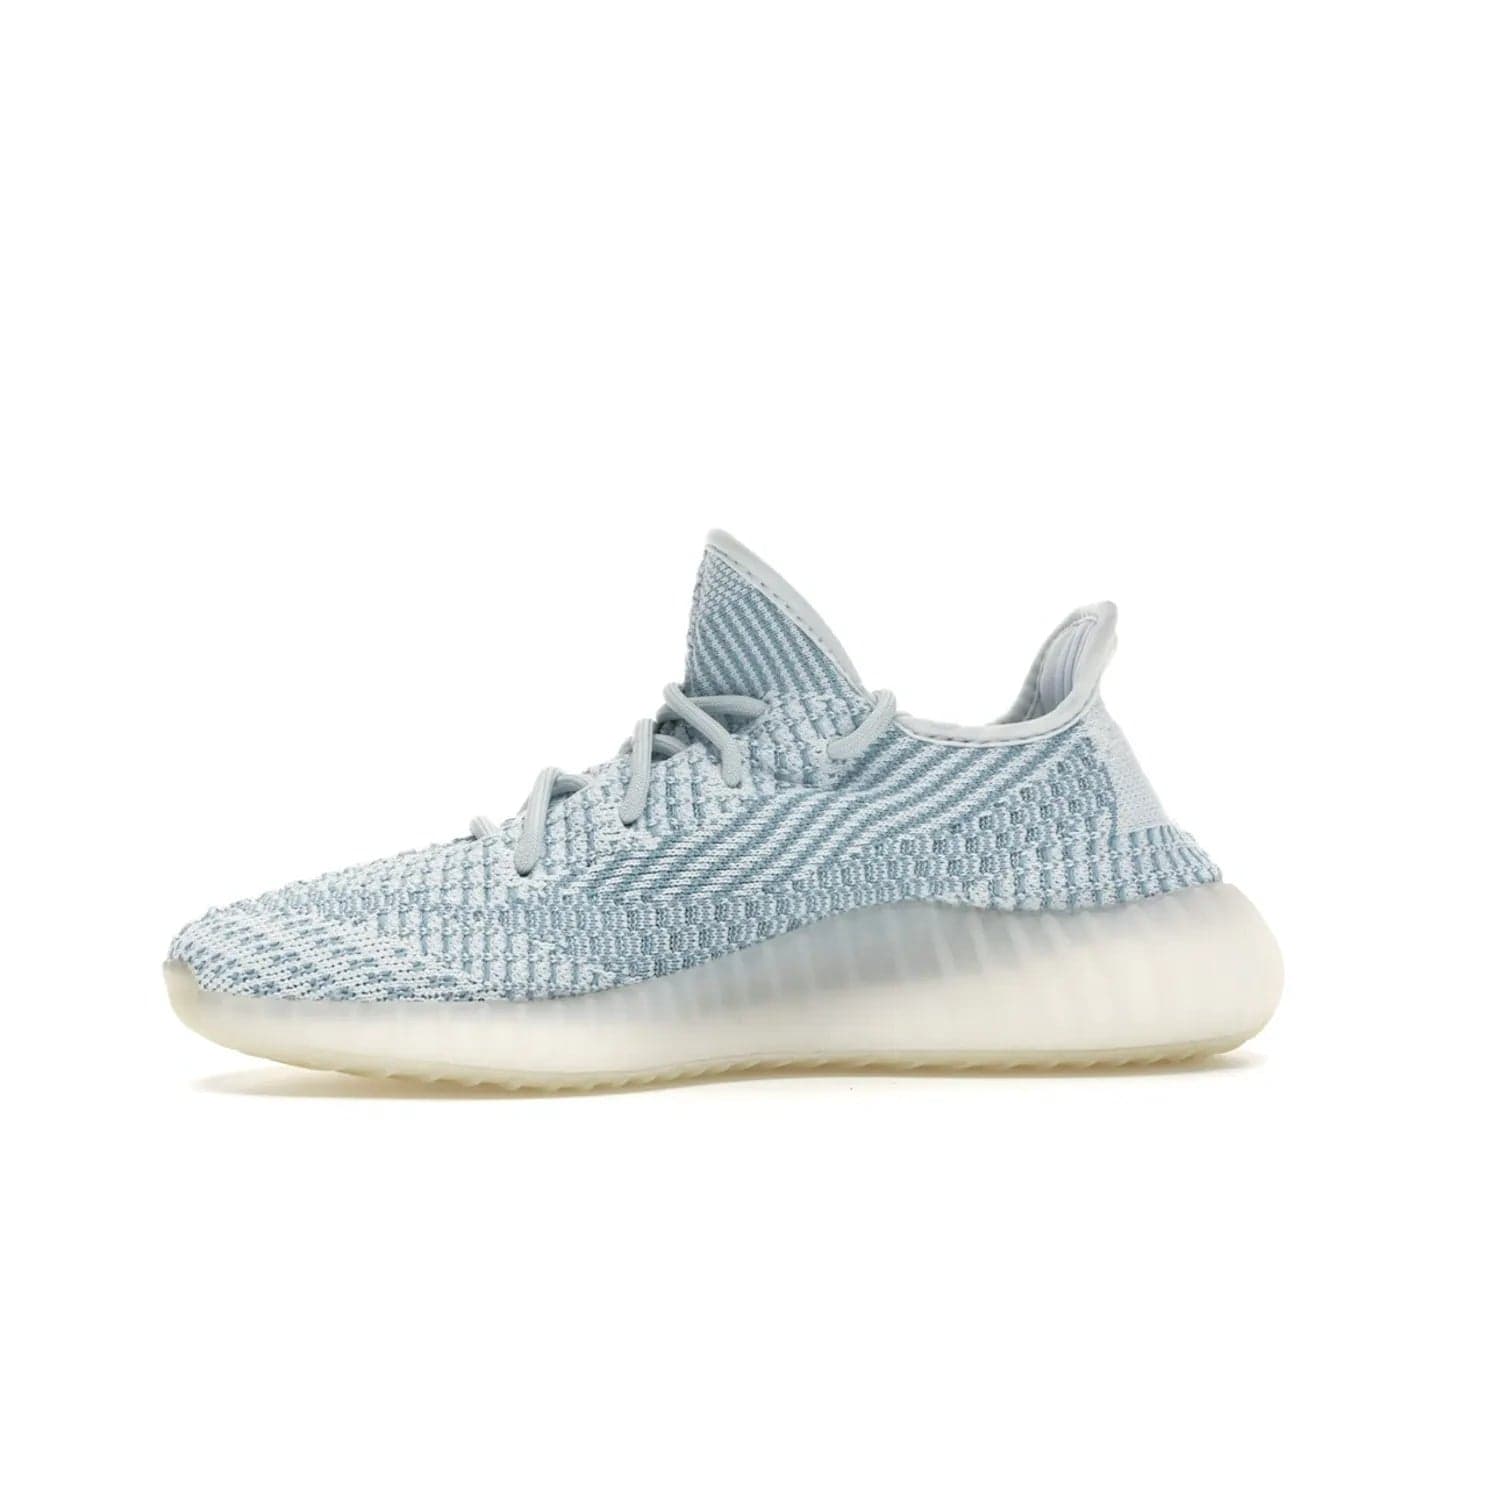 adidas Yeezy Boost 350 V2 Cloud White (Non-Reflective) - Image 18 - Only at www.BallersClubKickz.com - Uniquely designed adidas Yeezy Boost 350 V2 Cloud White (Non-Reflective) with a Primeknit upper in shades of cream and blue with a contrasting hard sole. A fashion-forward sneaker with a transparent strip and blue-and-white patterns.